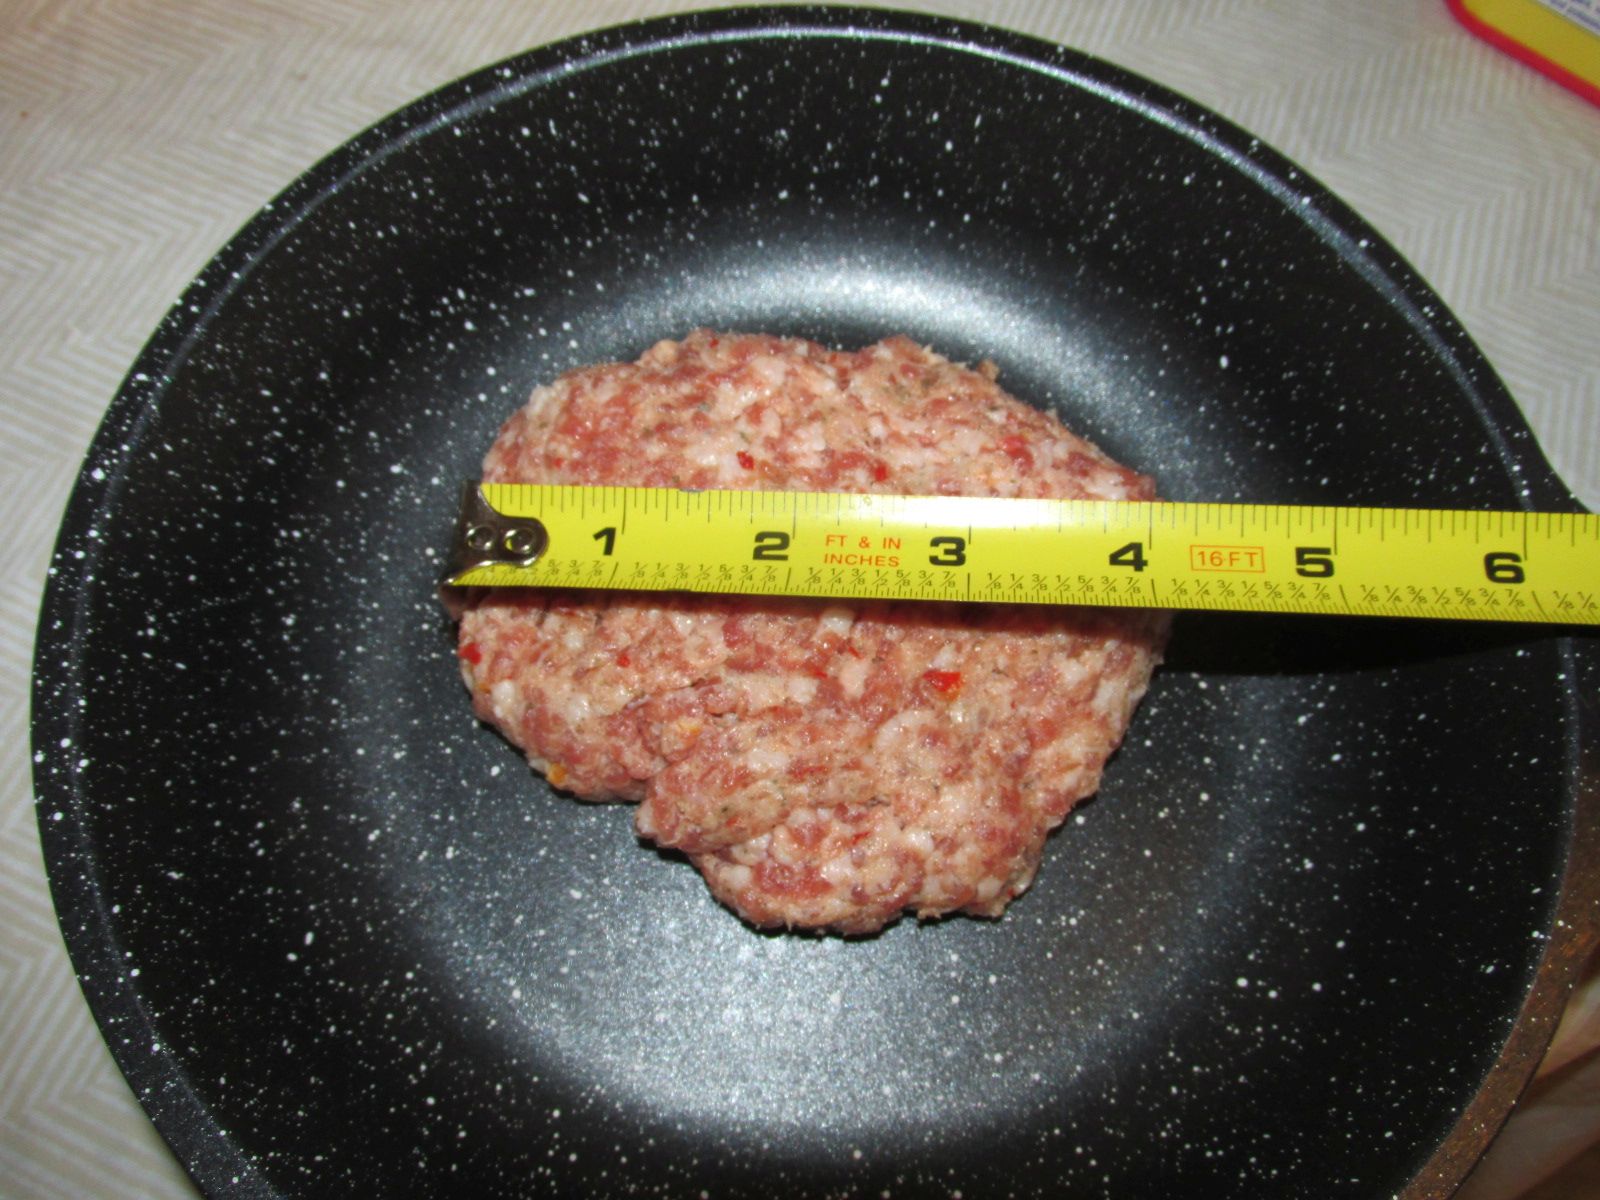 240221 002 uncooked sausage pattty 001a.jpg